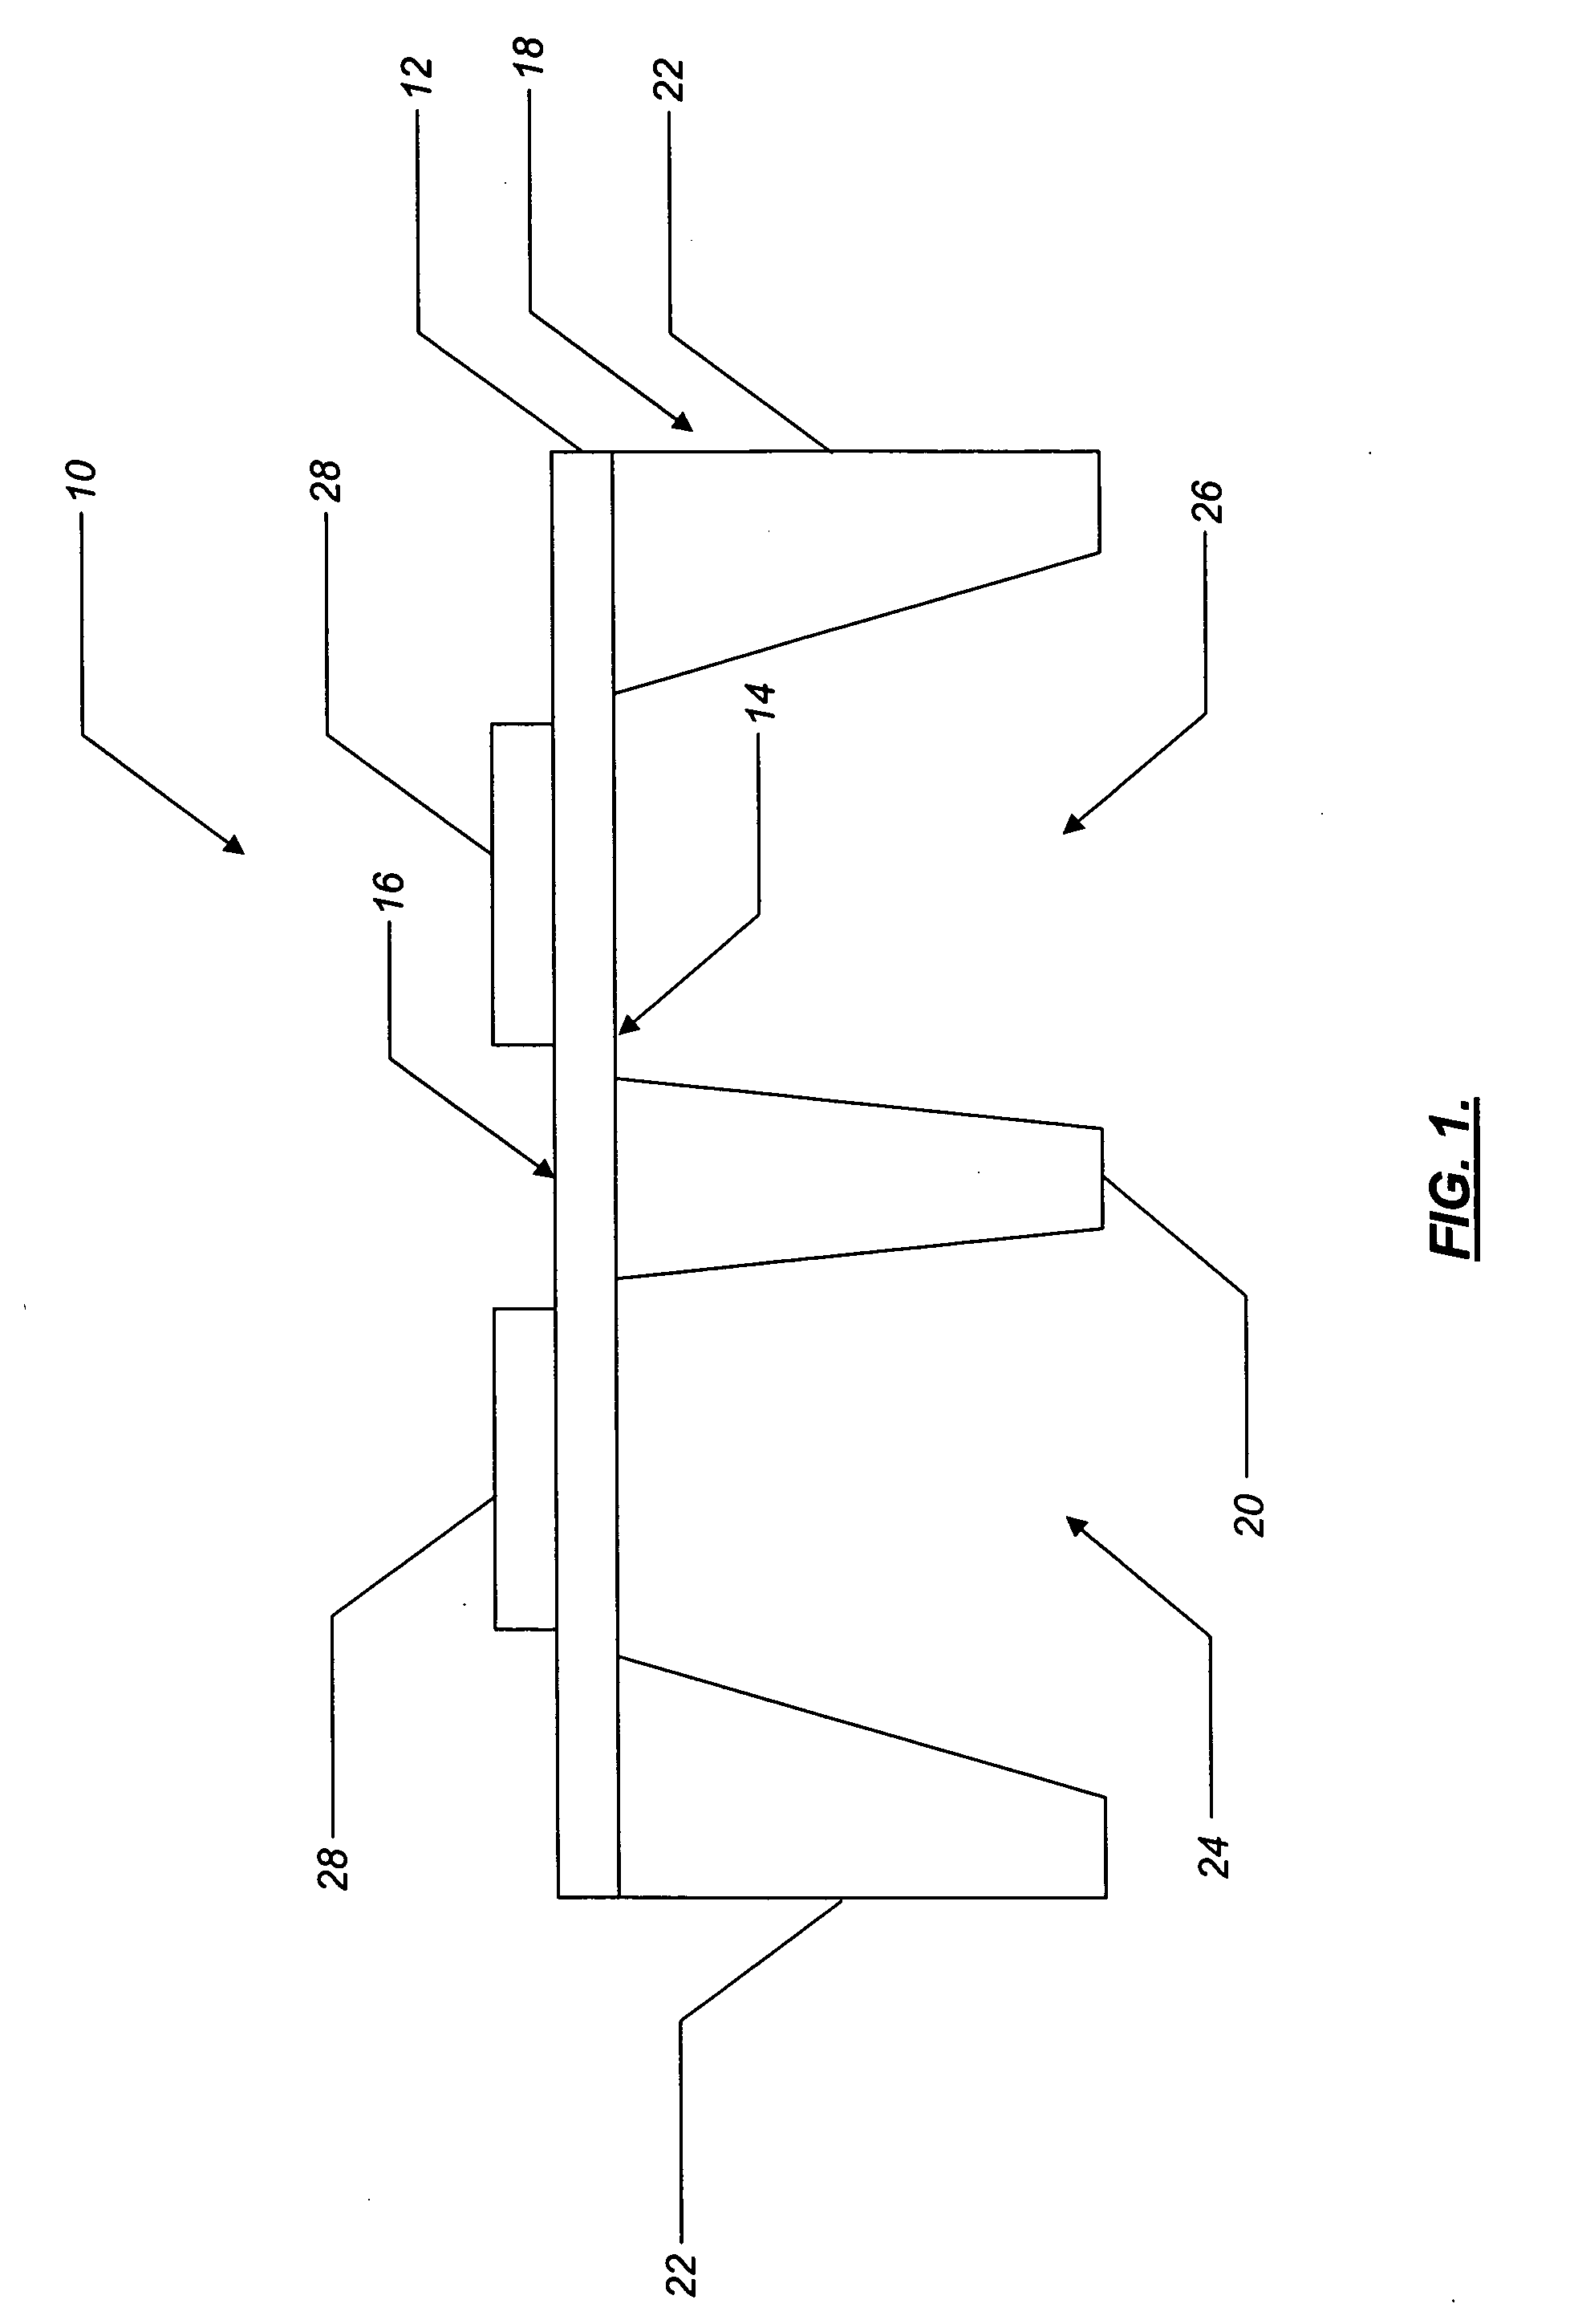 Nano-calorimeter device and associated methods of fabrication and use